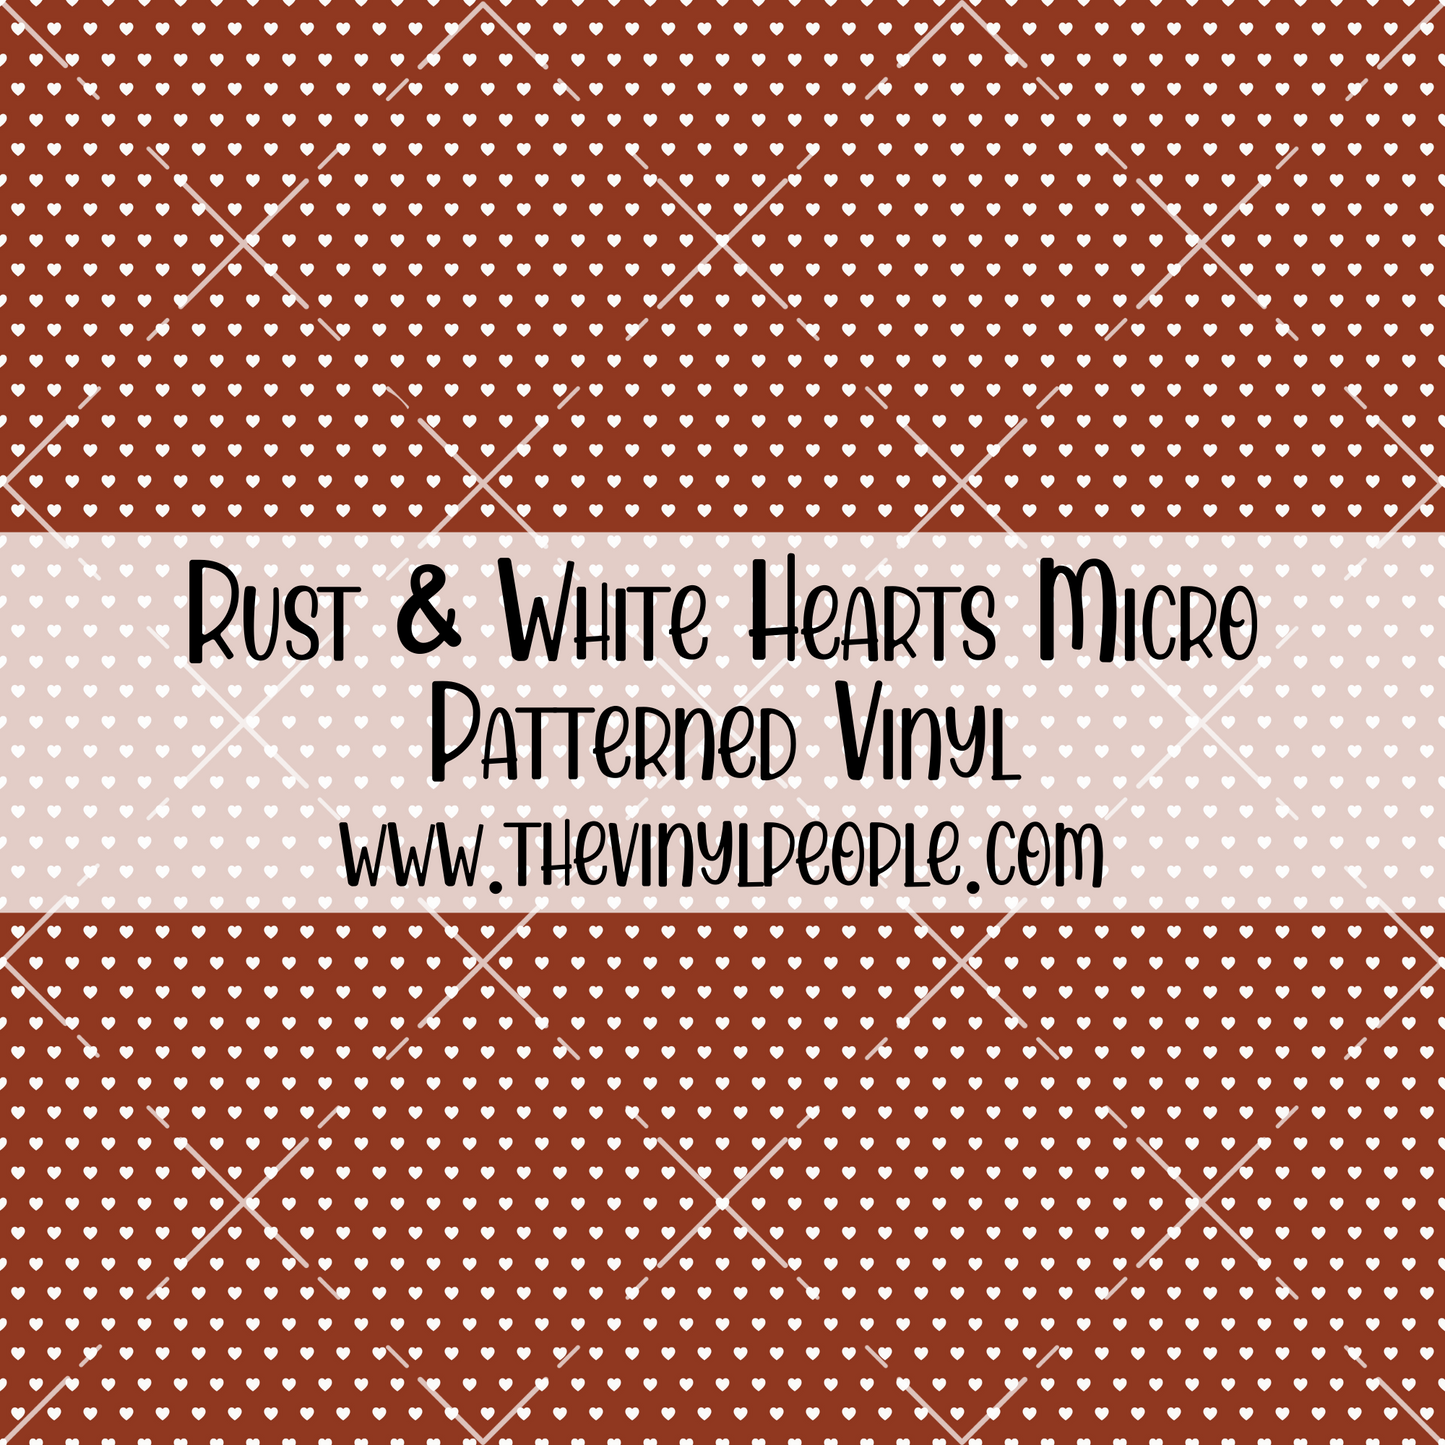 Rust & White Hearts Patterned Vinyl